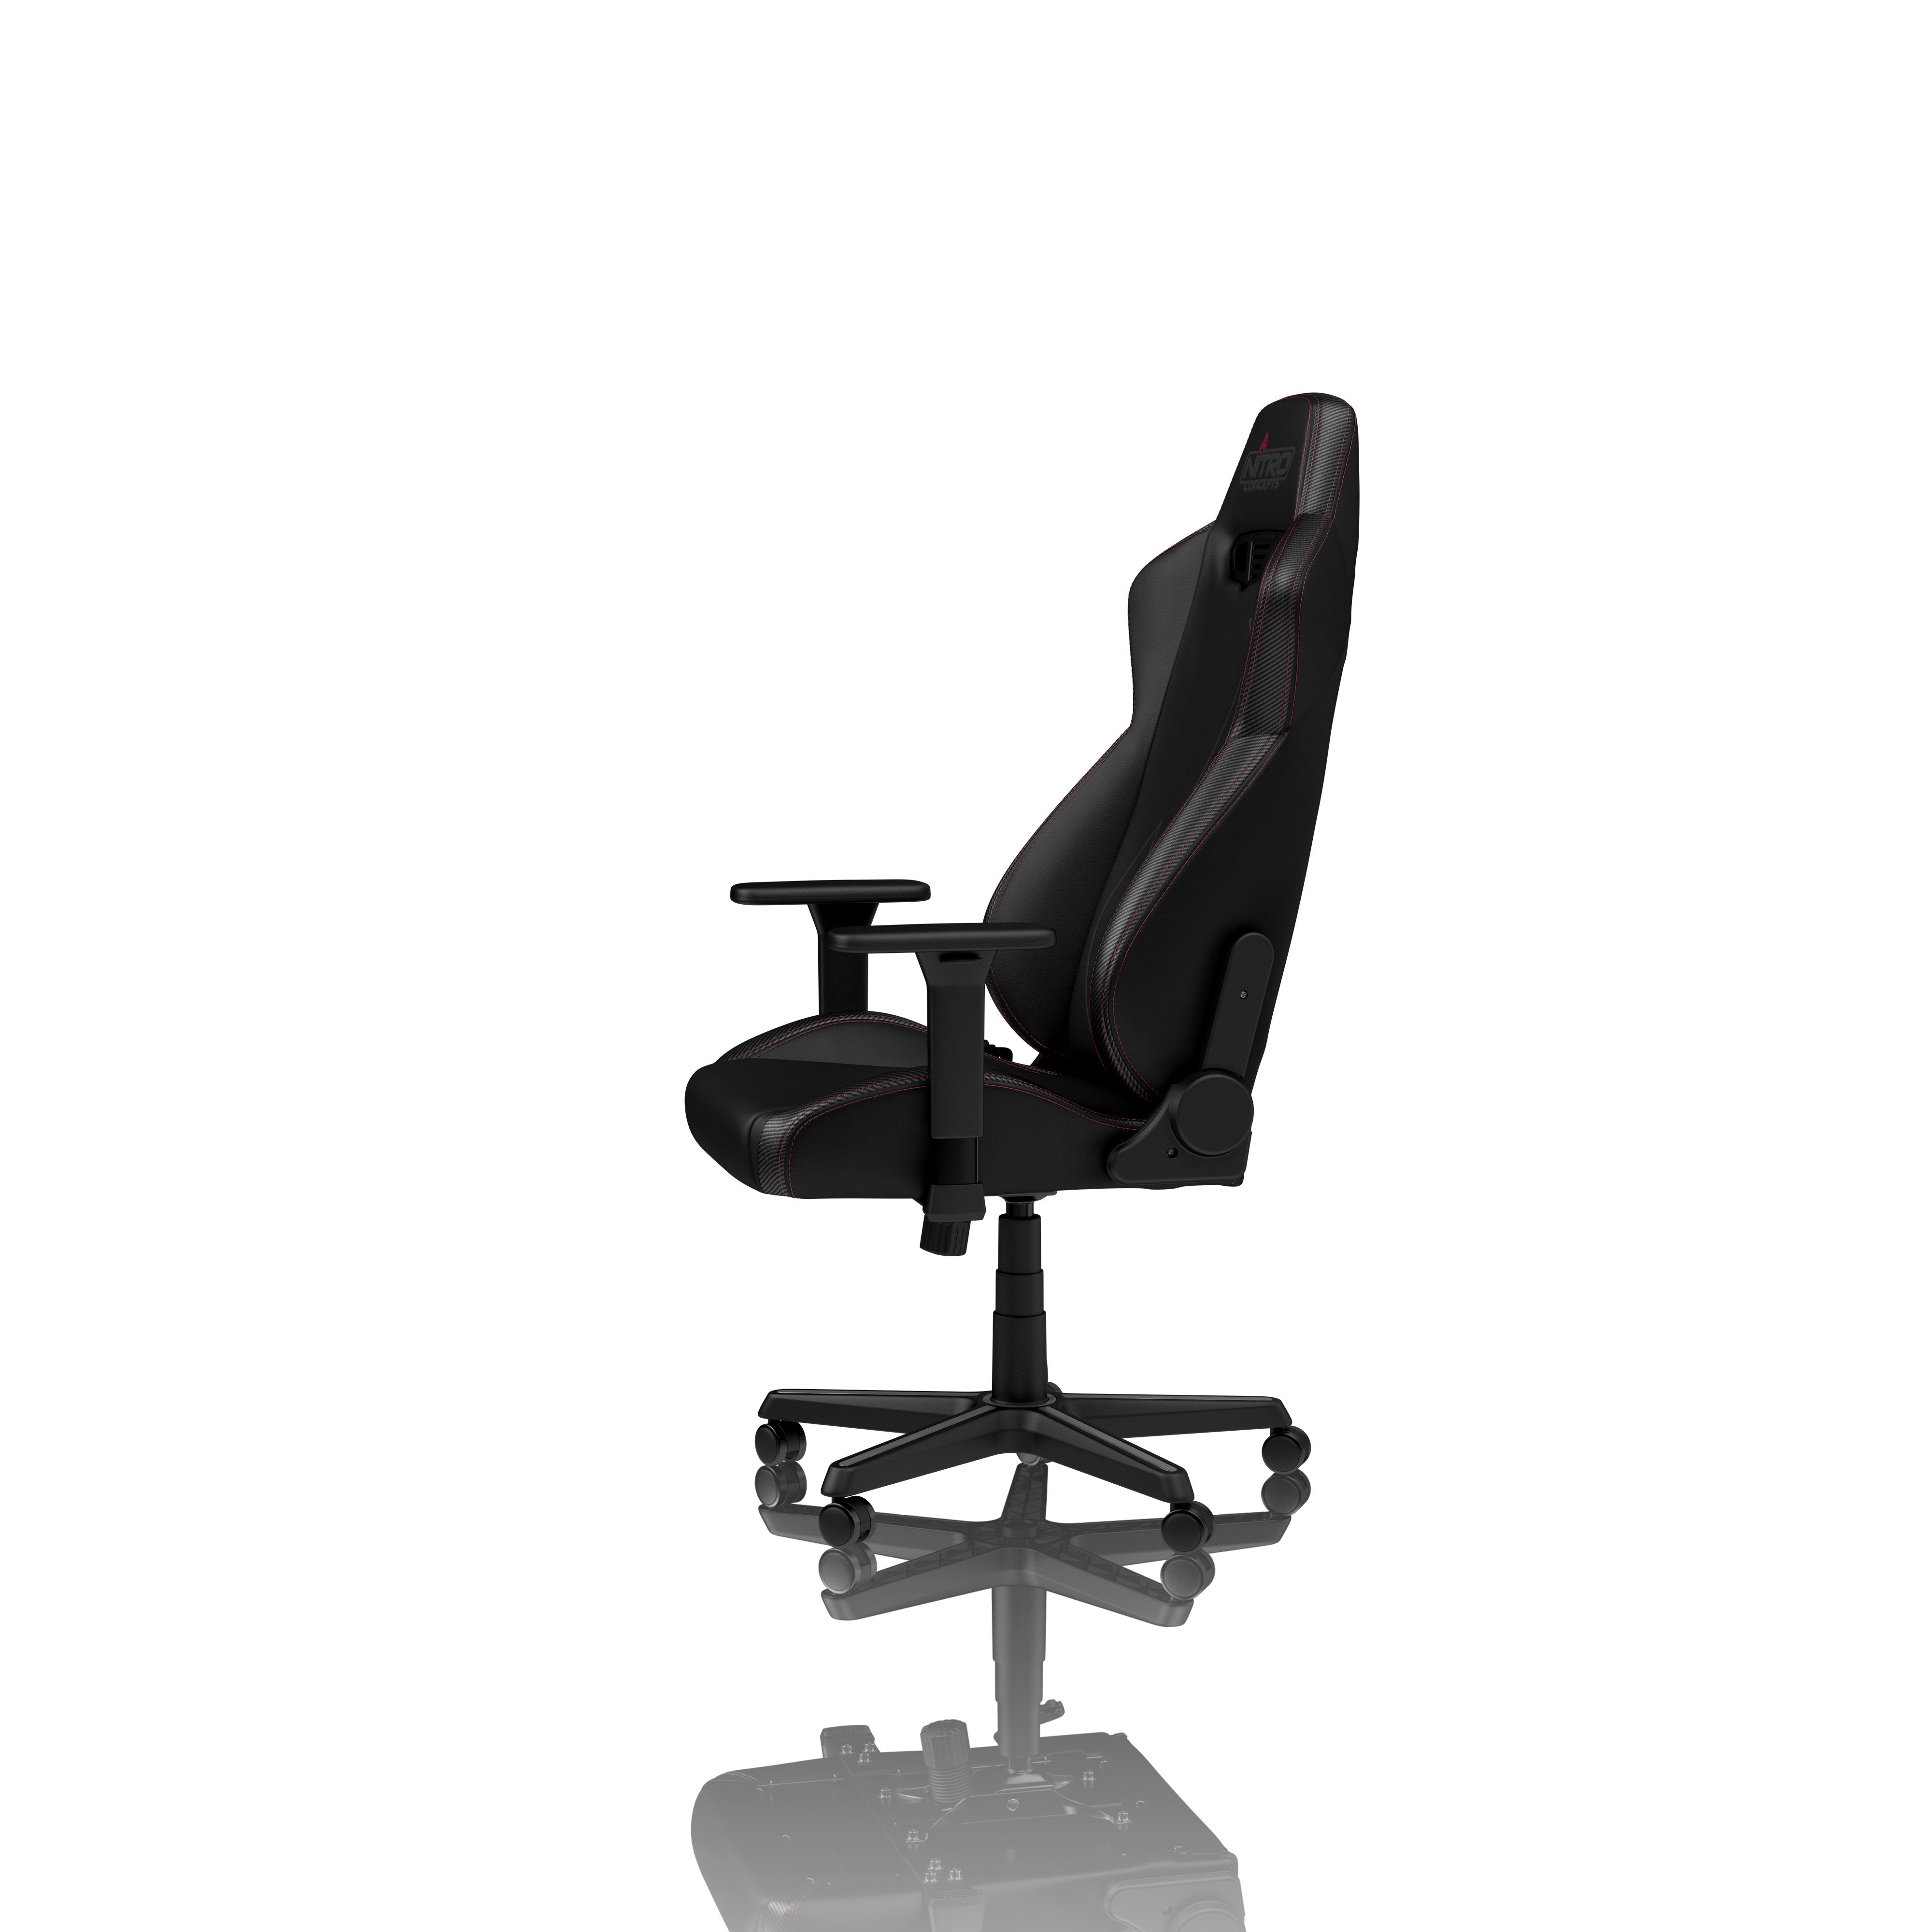 nitro-concepts - S300 EX Gaming Chair Carbon Black